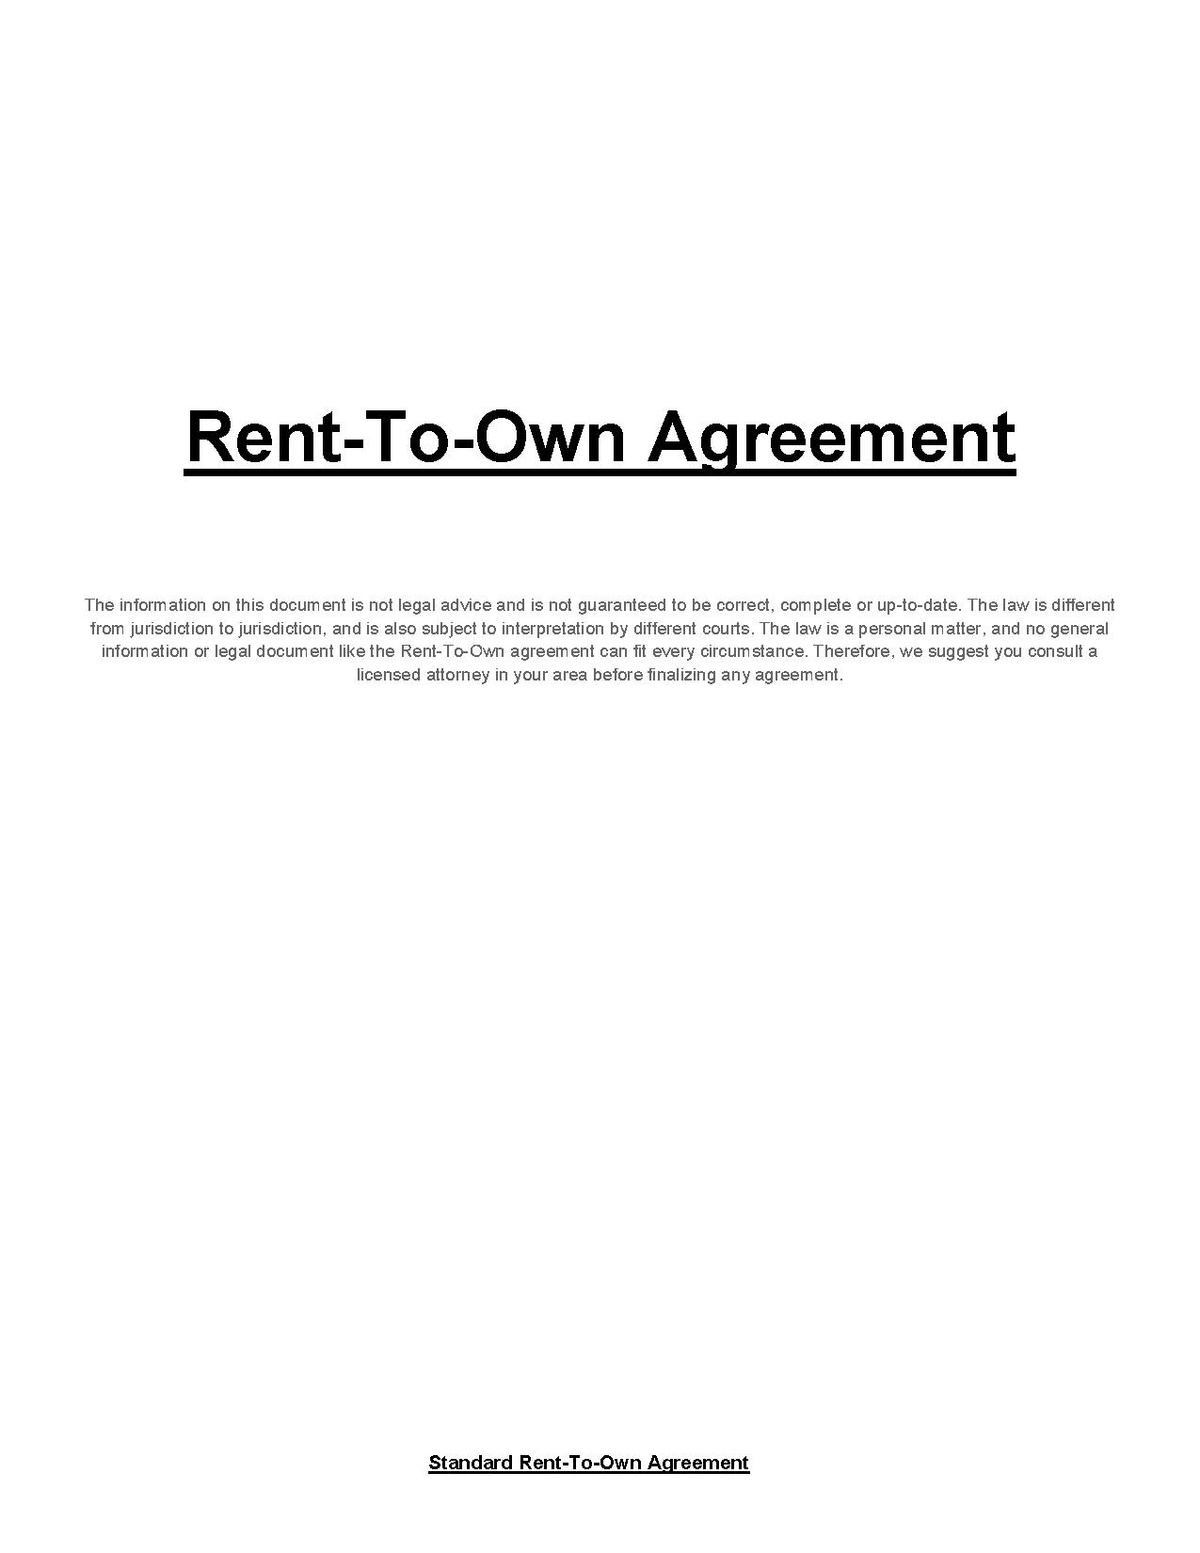 Simple Home Purchase Agreement Lease Purchase Contract Wikipedia